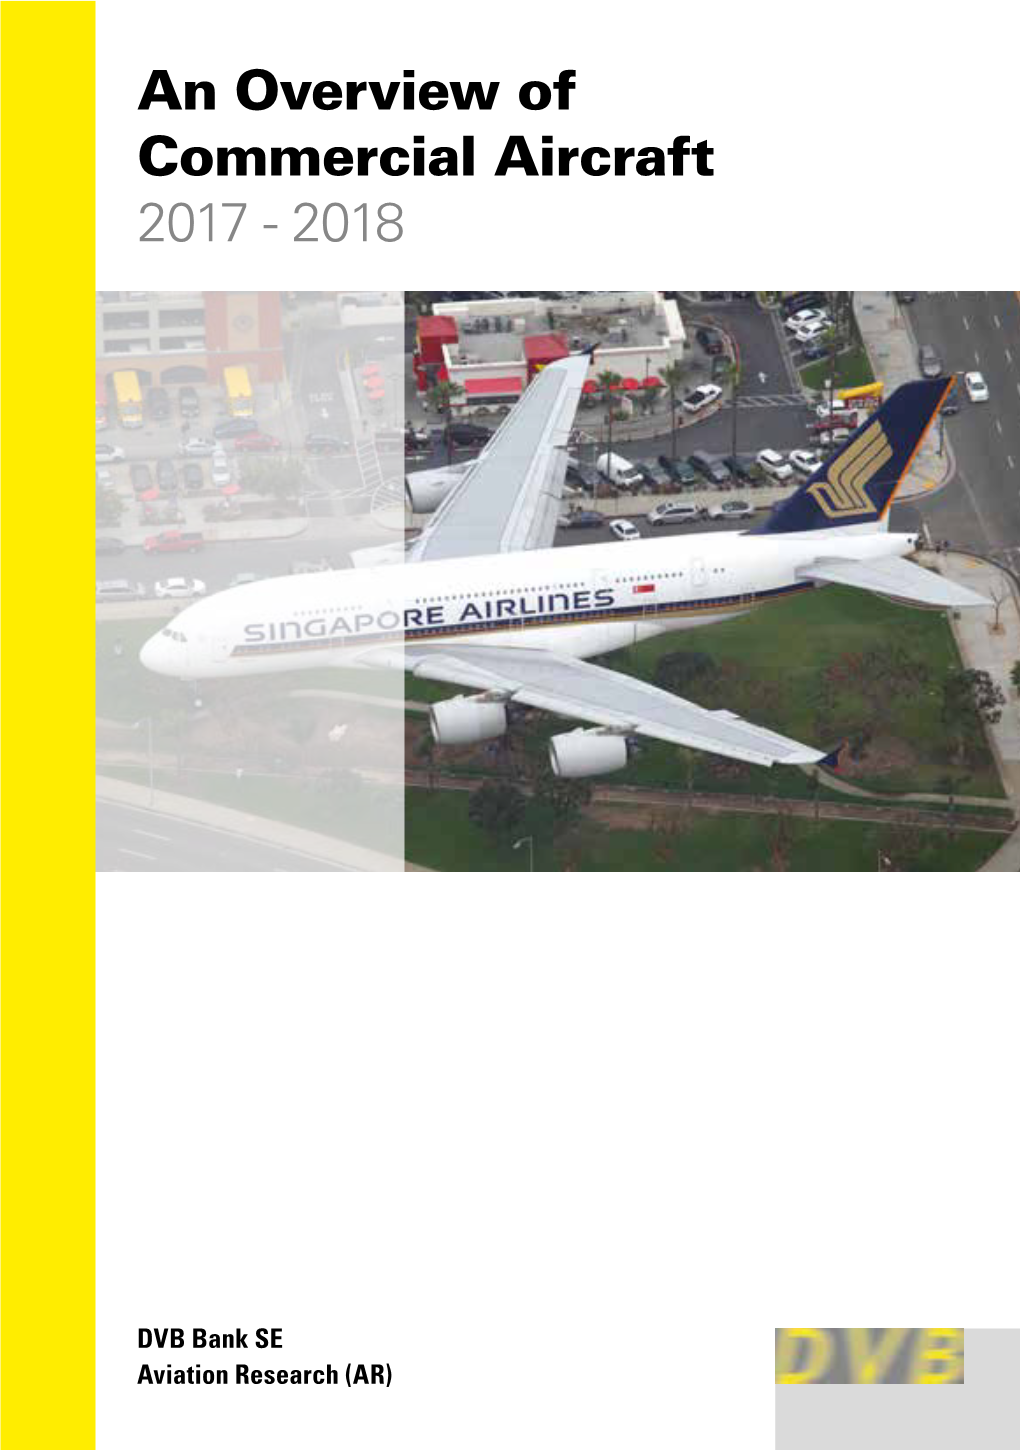 An Overview of Commercial Aircraft 2017 - 2018